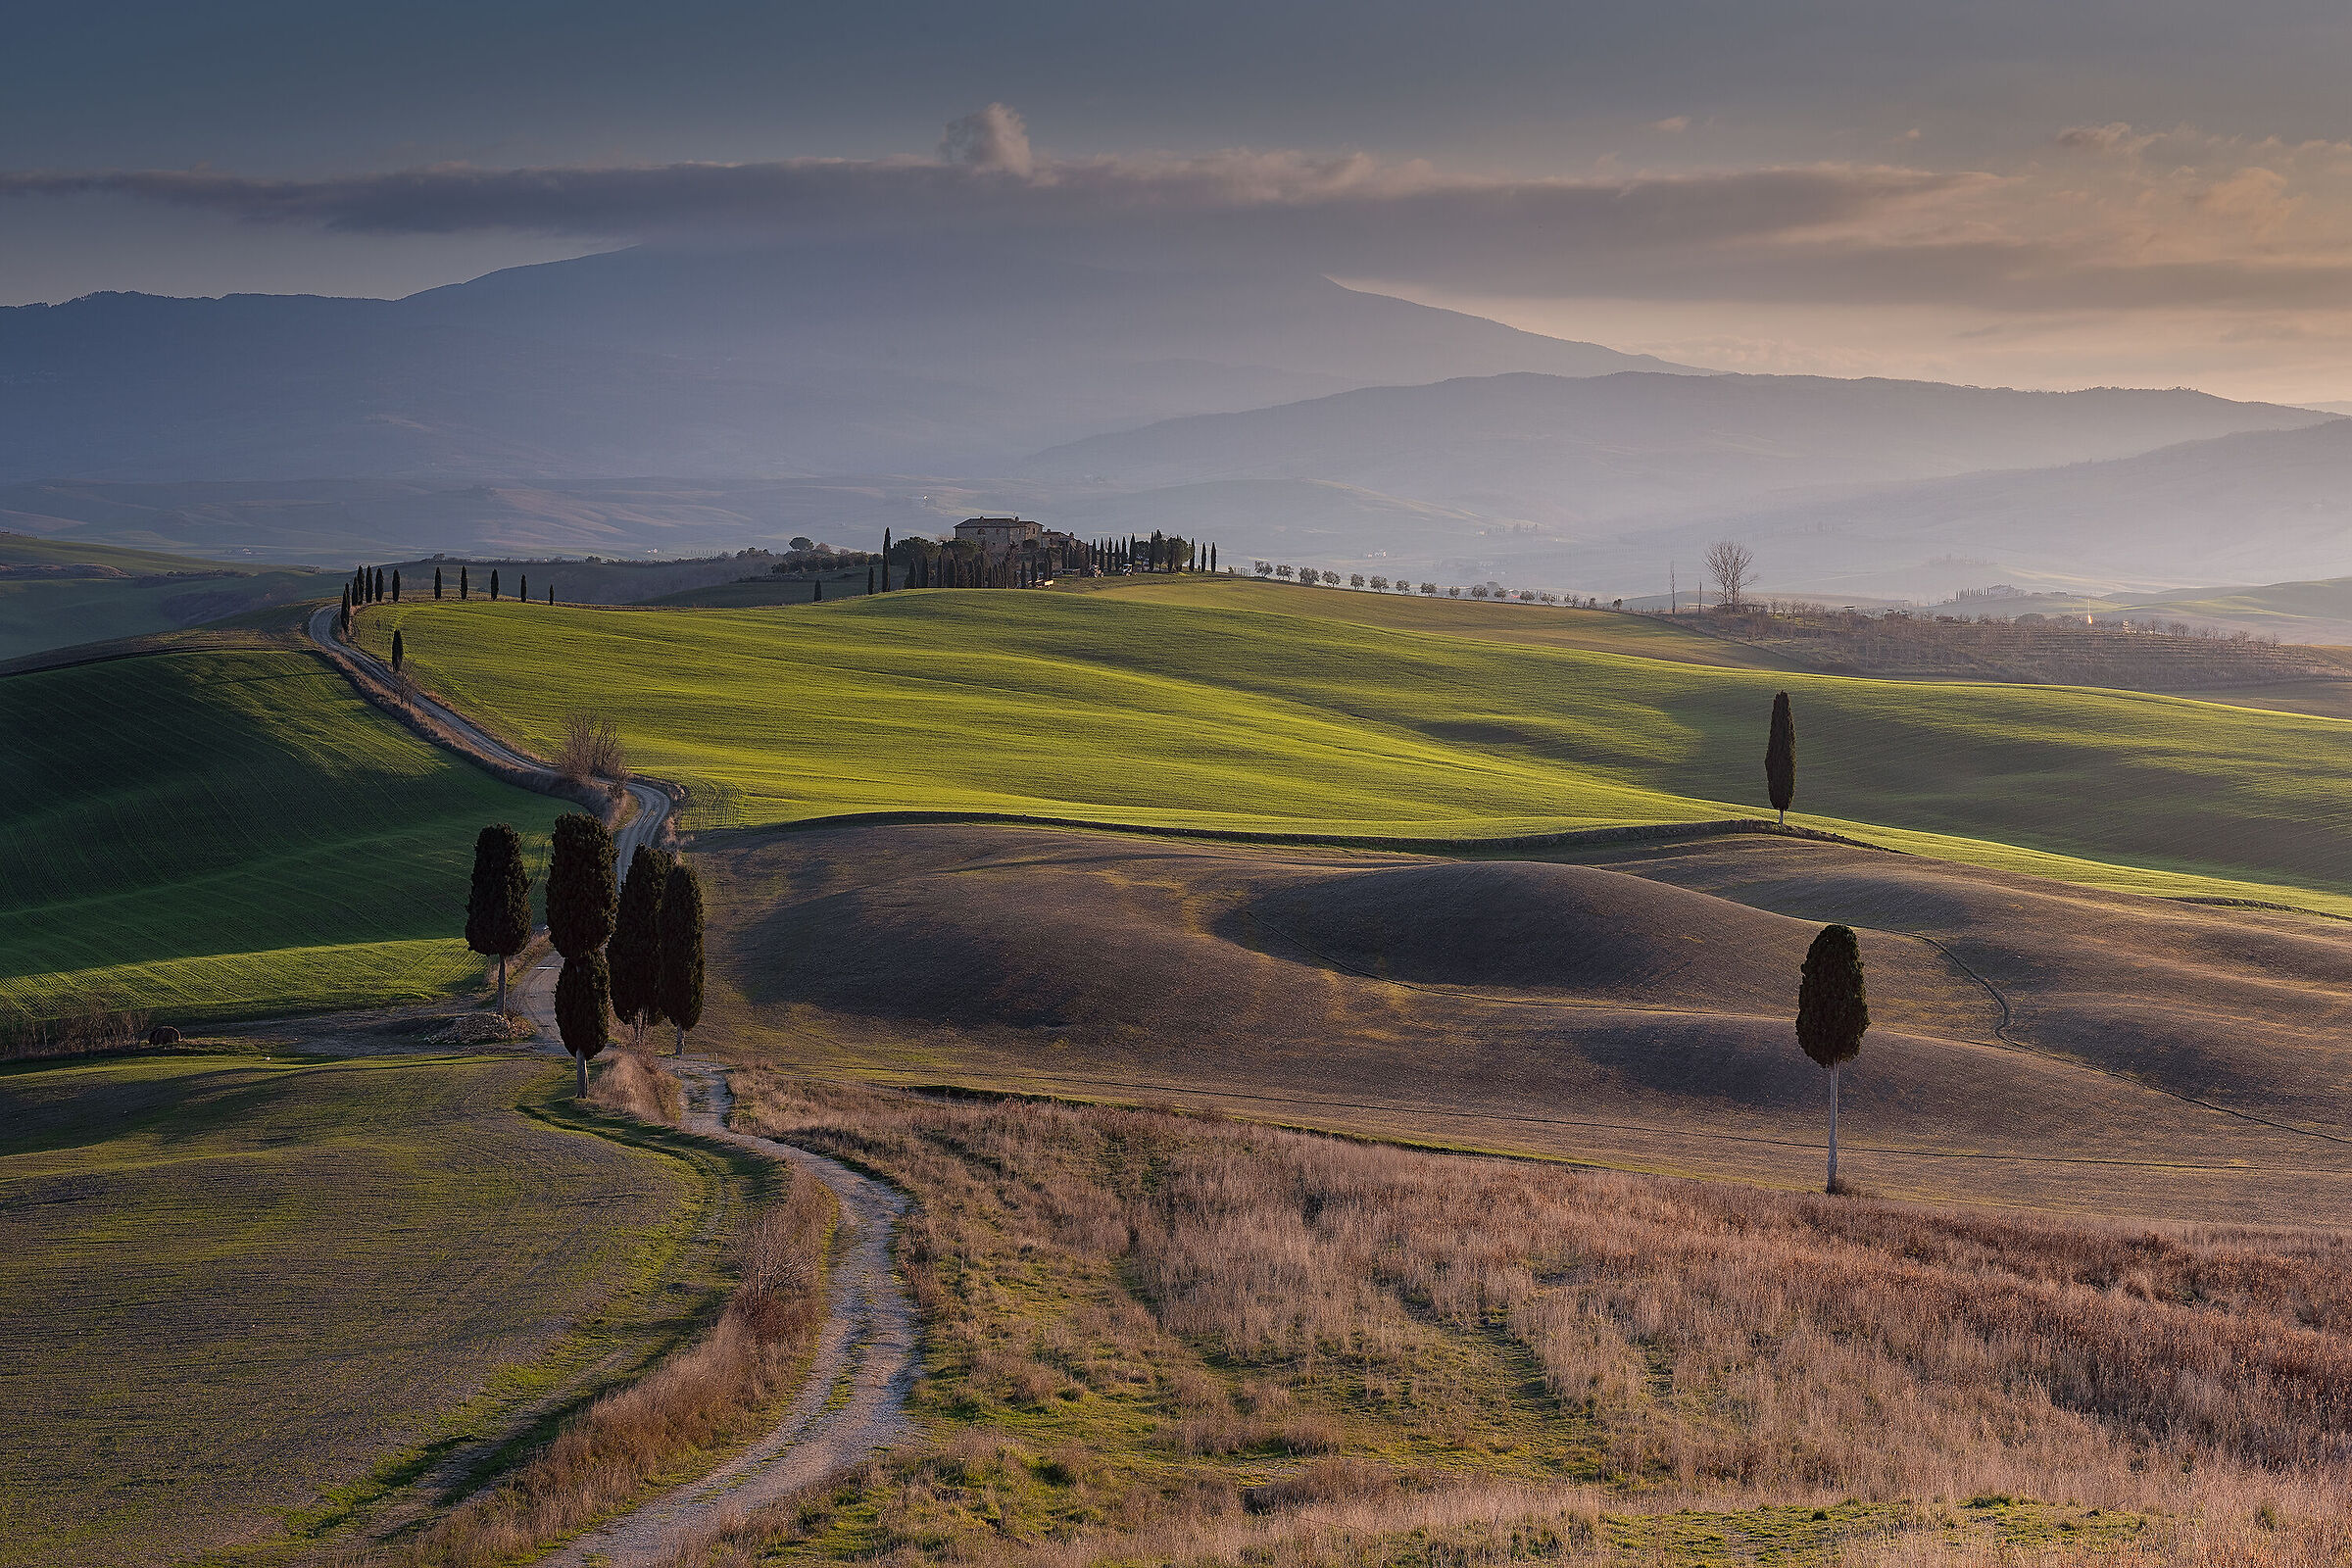 Terrapille and the Elysian fields, Pienza....